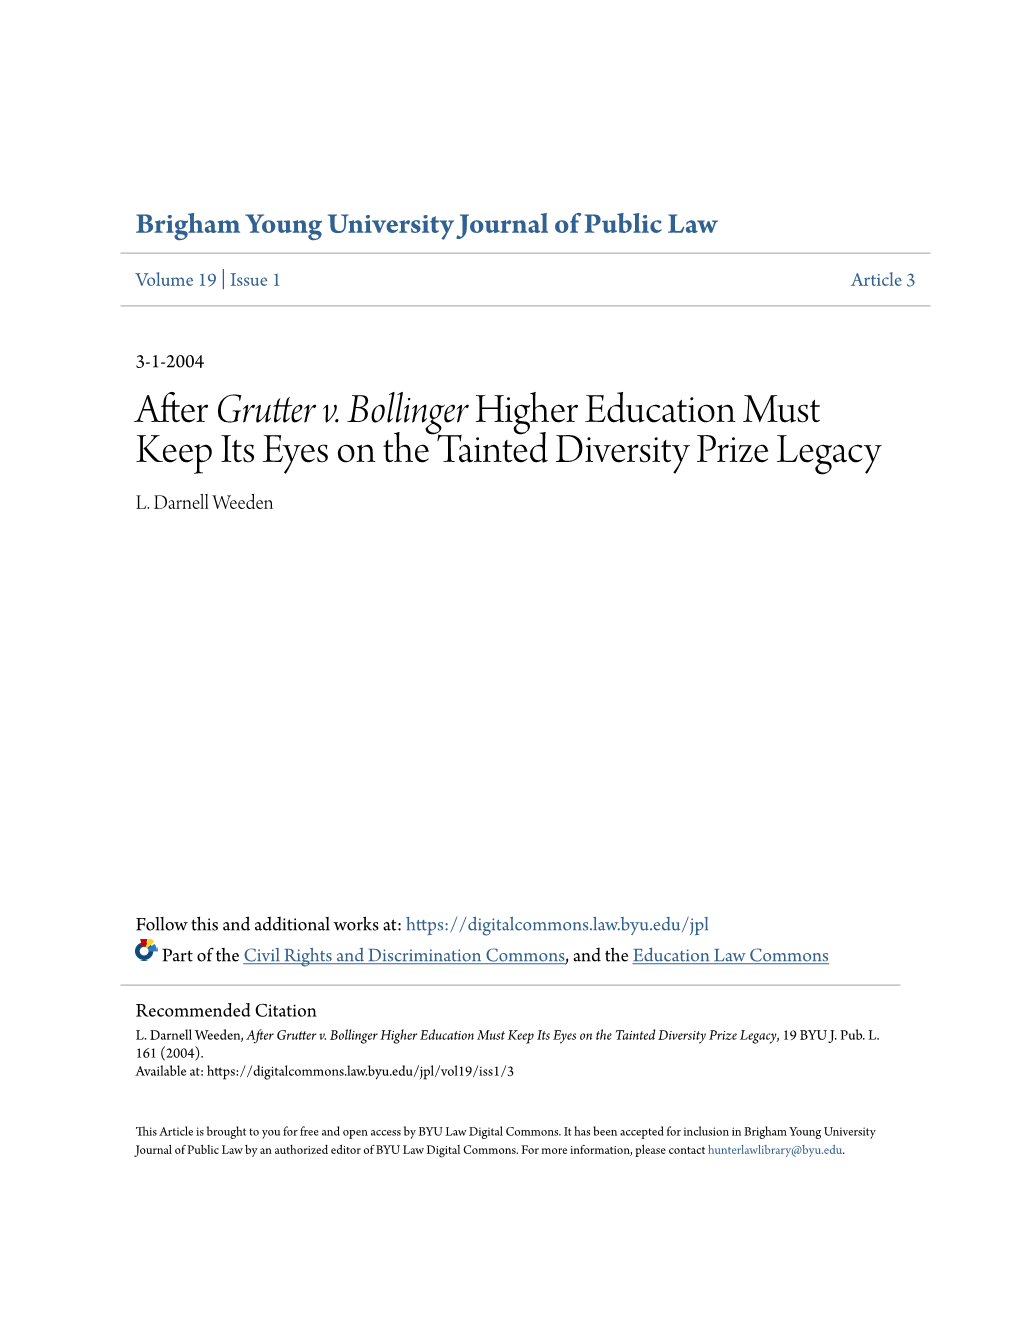 After Grutter V. Bollinger Higher Education Must Keep Its Eyes on the Tainted Diversity Prize Legacy L